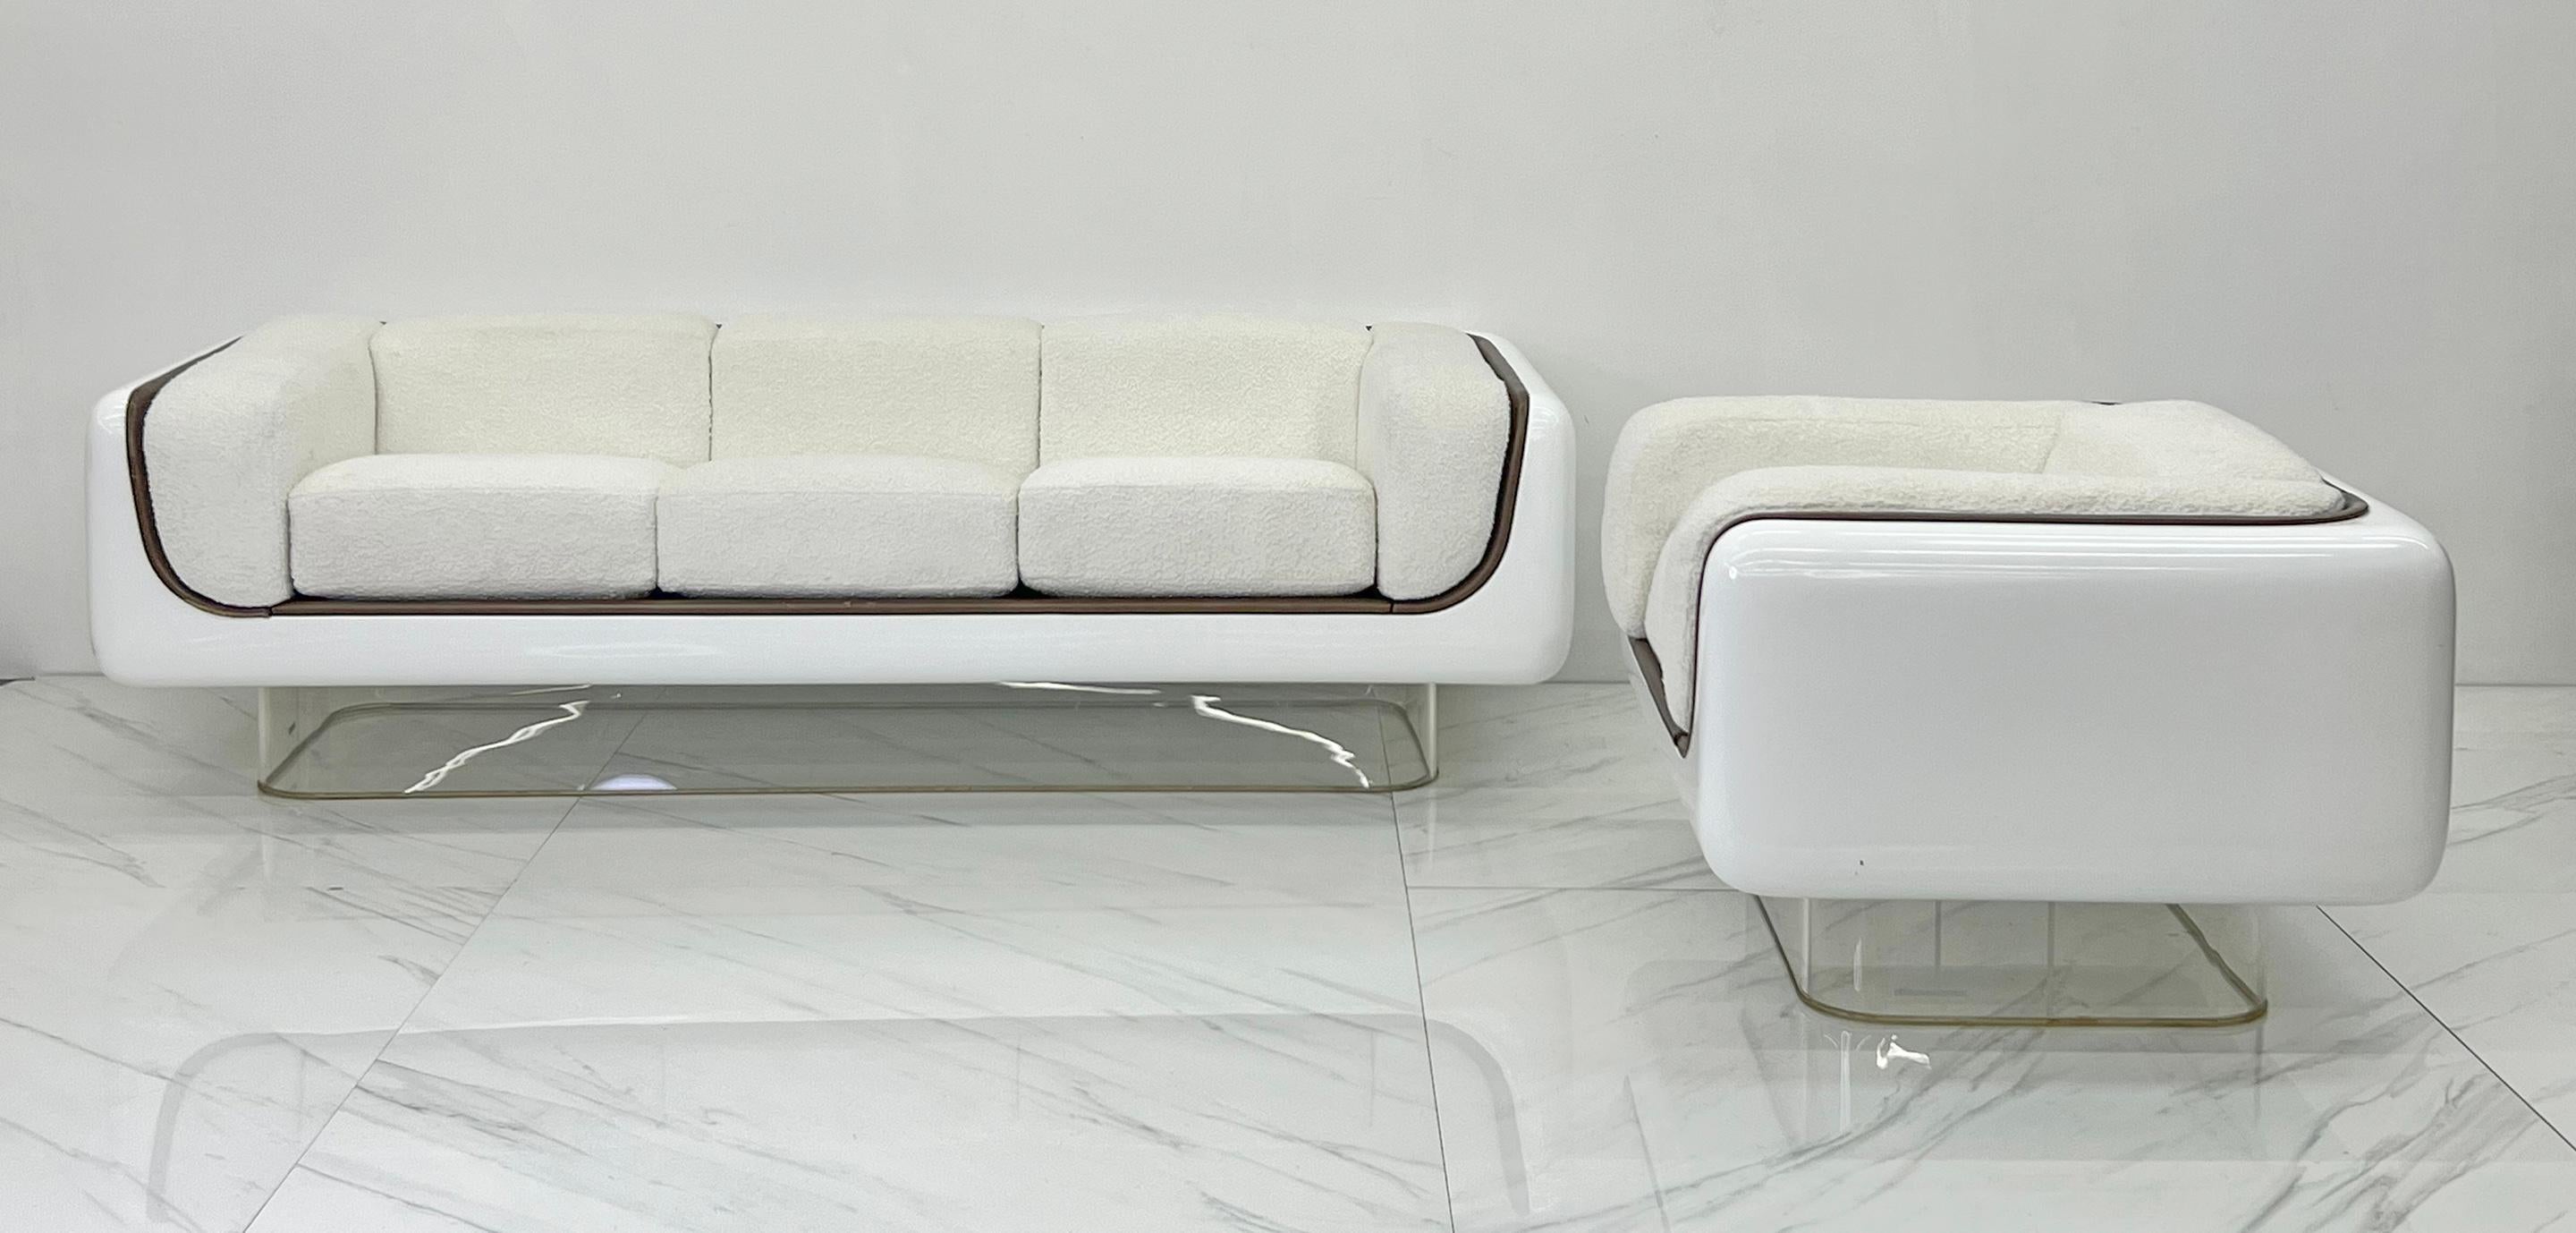 William Andrus for Steelcase Space Age, Sofa, White Bouclé and Leather, 1970s 1